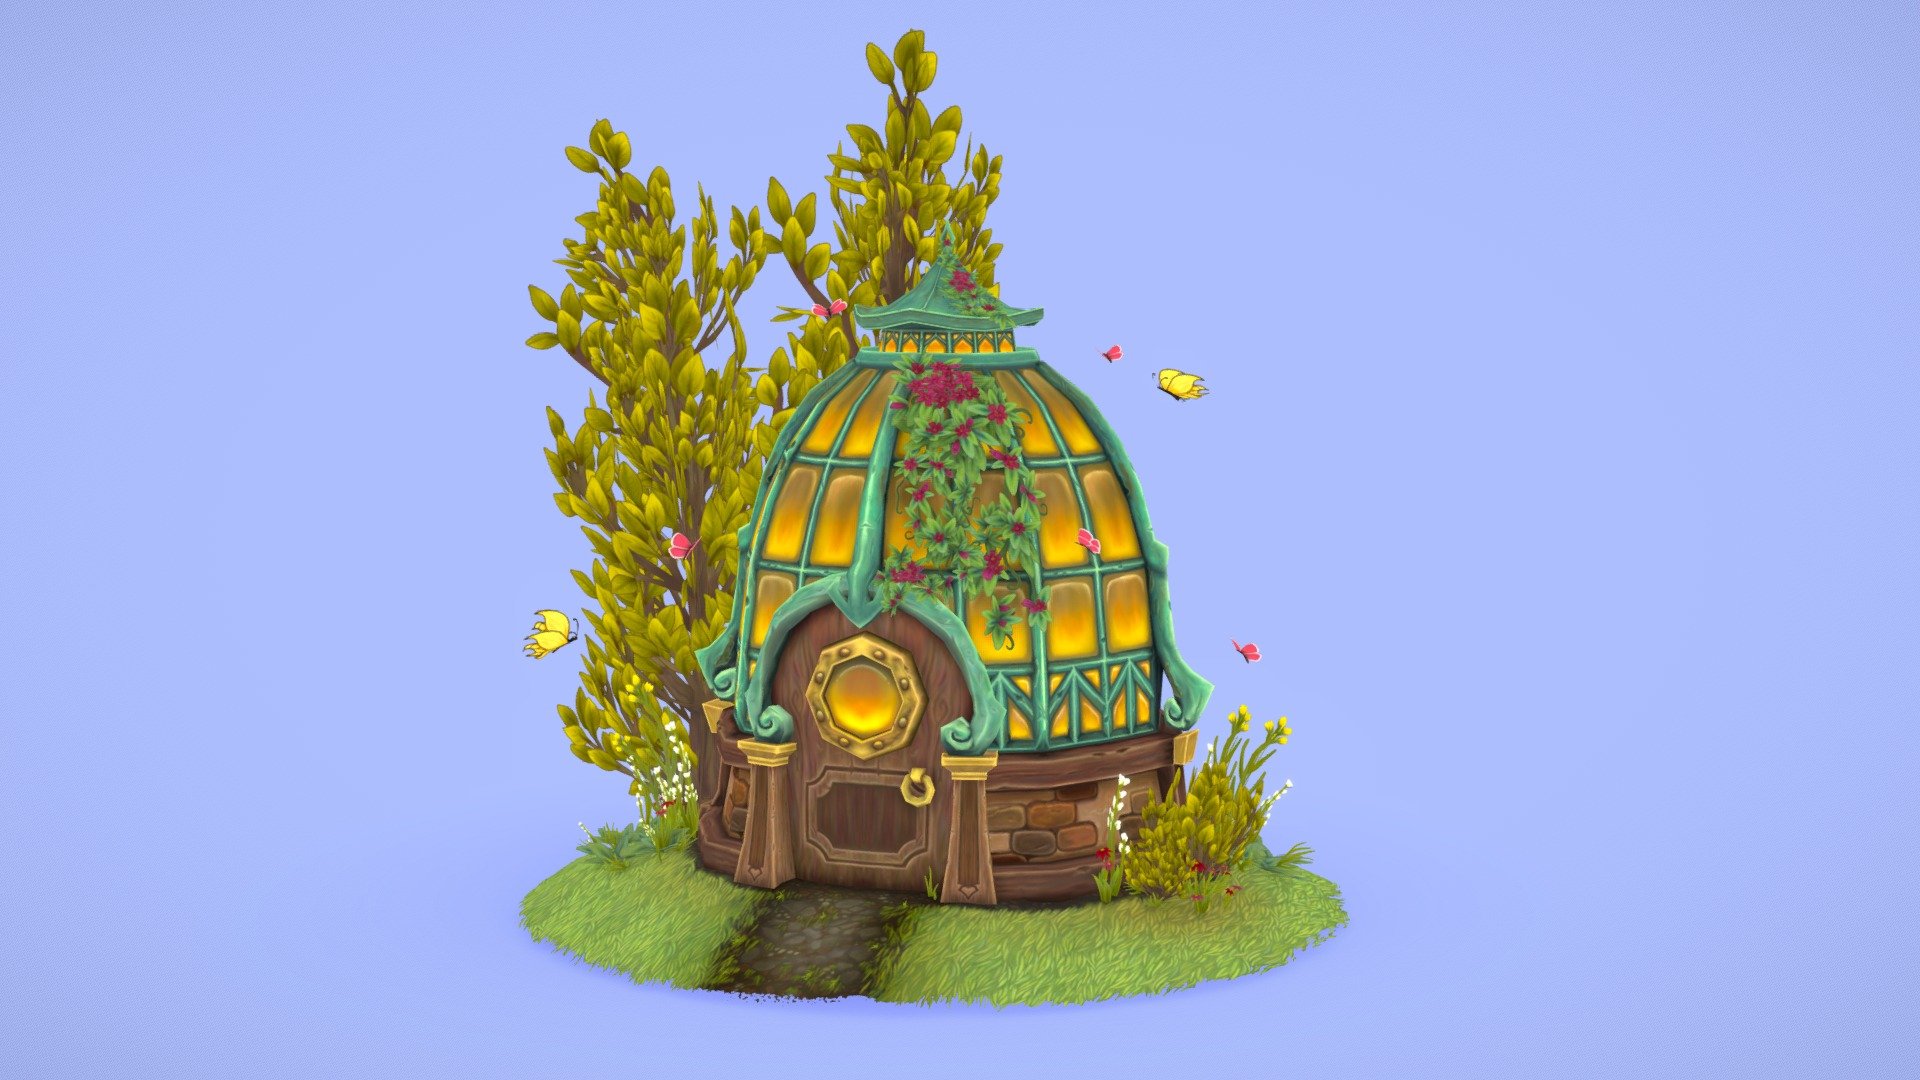 Inspired by World of Warcraft's Stormsong Valley, this butterfly garden was part of Ashley Warner's &ldquo;Creating Stylized Assets